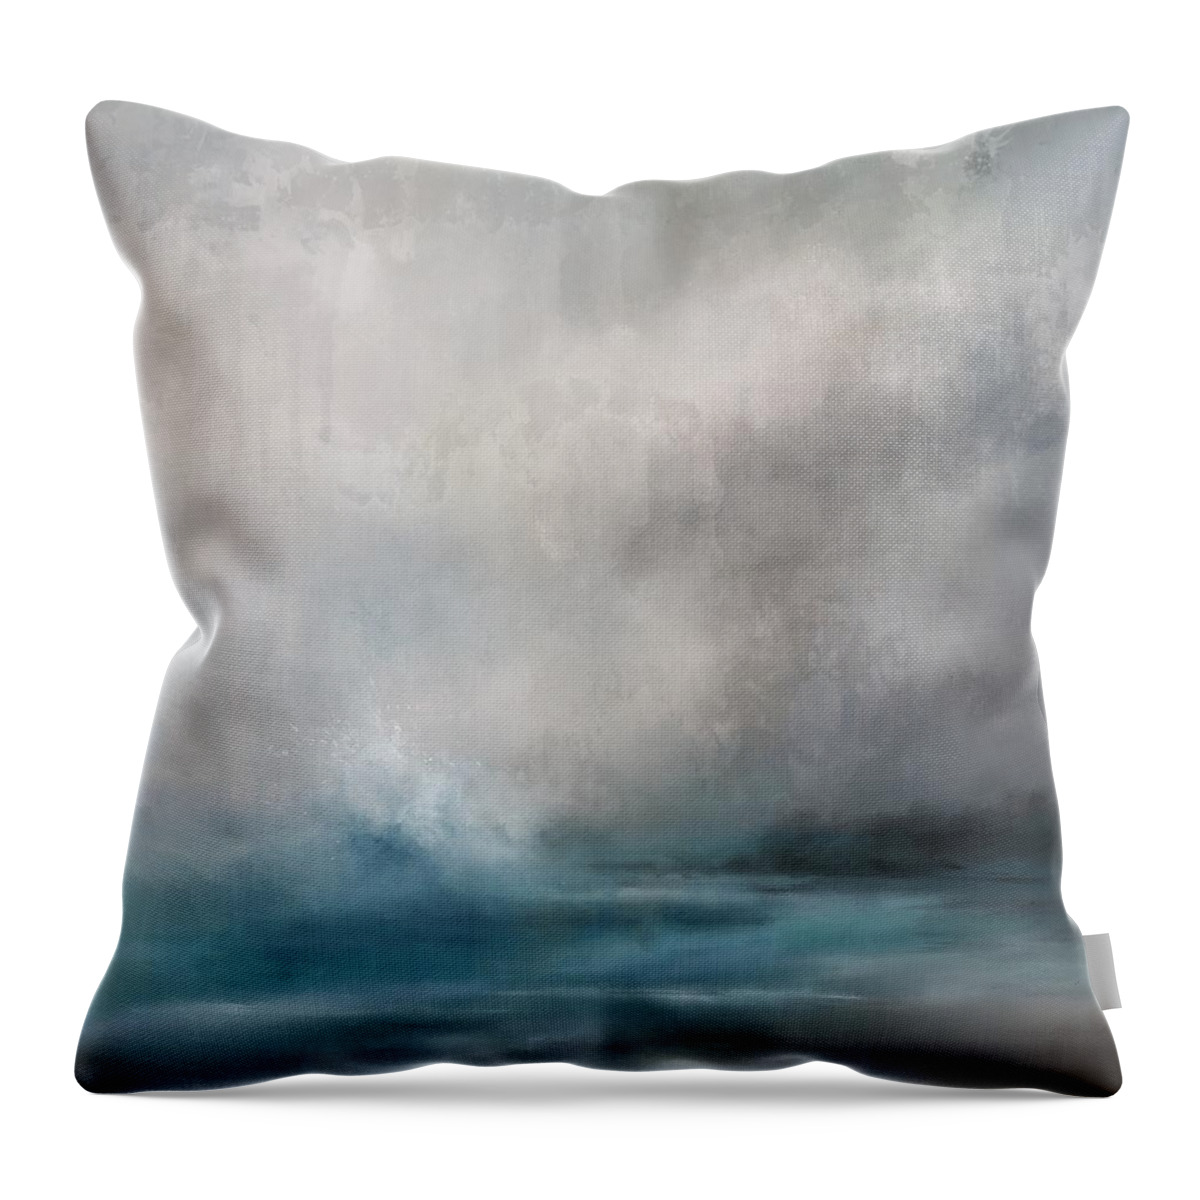 Ocean Throw Pillow featuring the painting Churning Sea by Jai Johnson